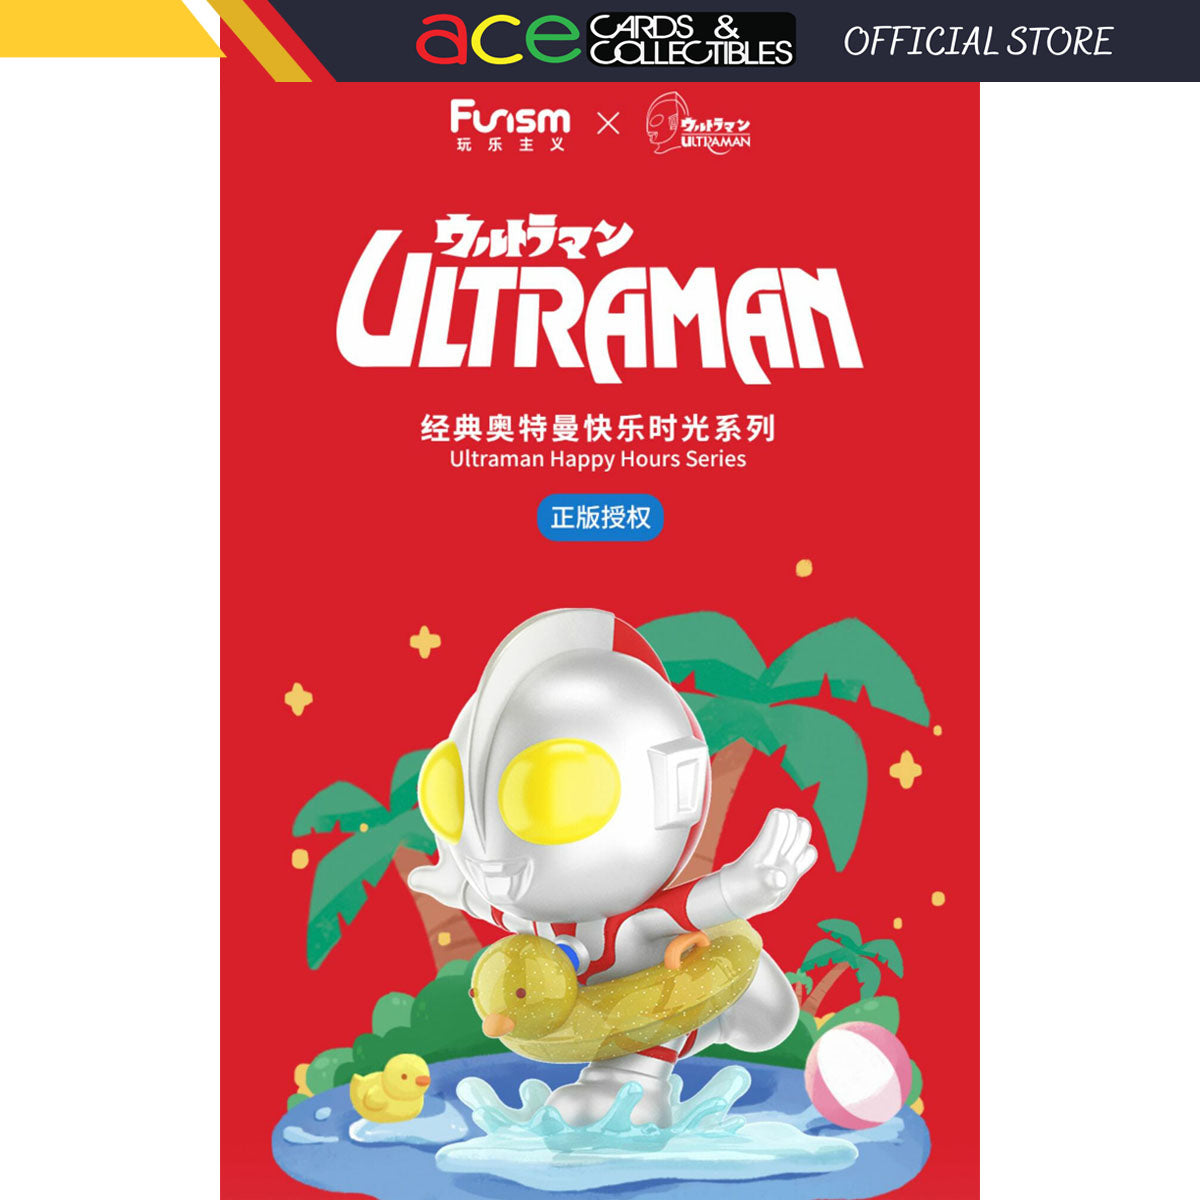 FUNISM Ultraman Happy Hours Series-Single Box (Random)-Funism-Ace Cards & Collectibles